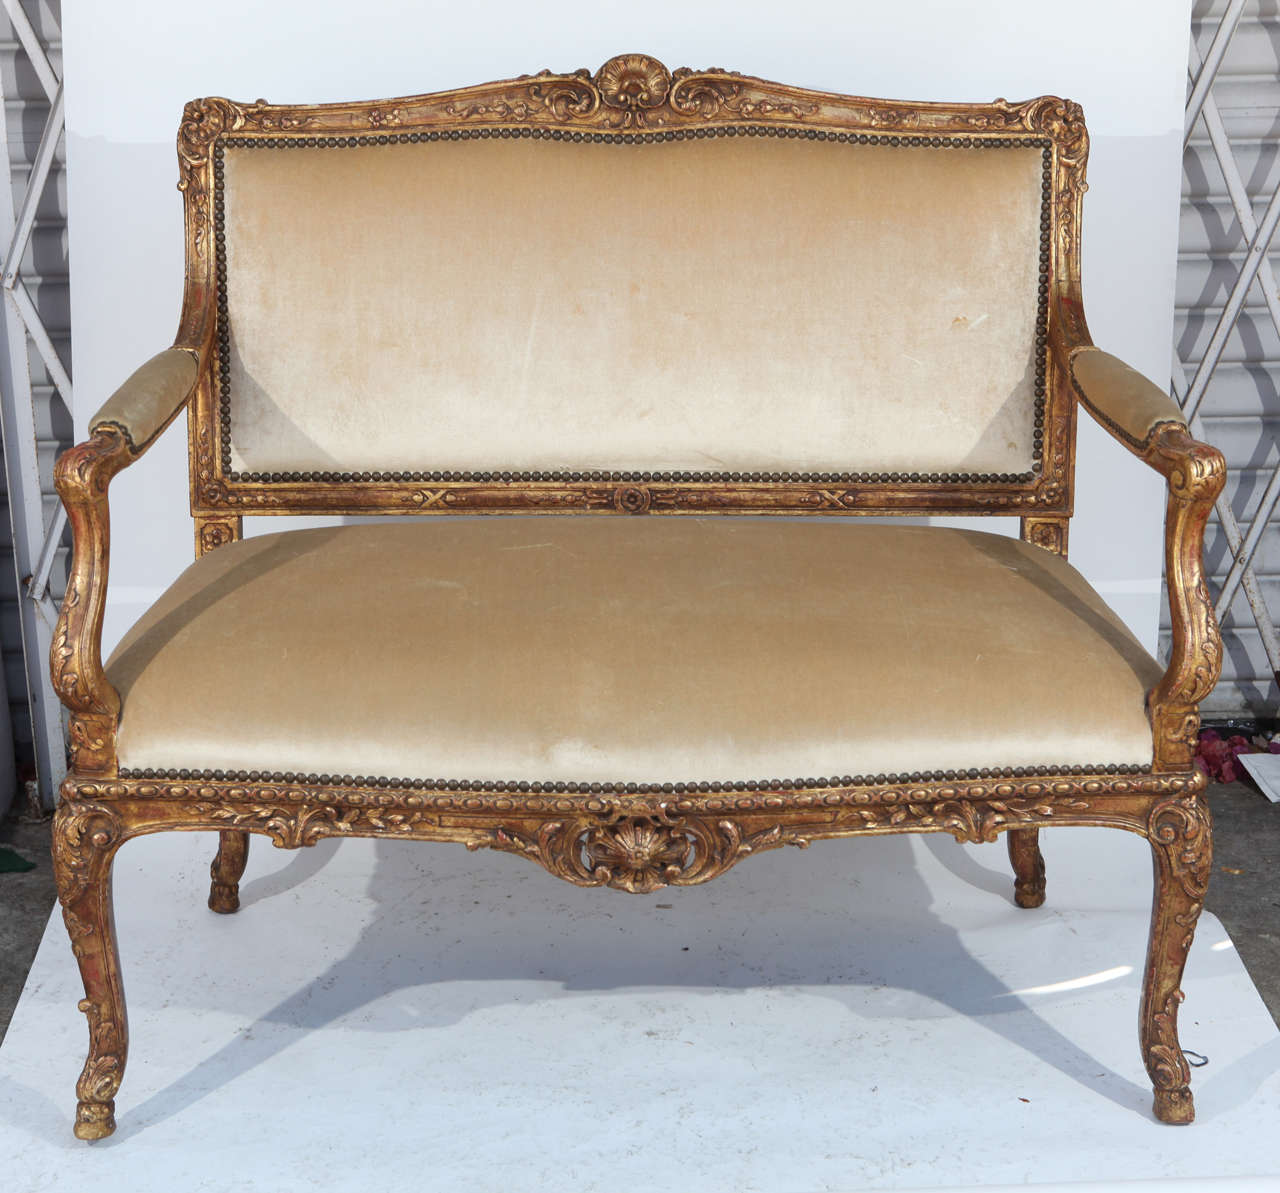 Late 18th-Early 19th century French Regency finely carved giltwood settee. Upholstered and detailed with nailheads.